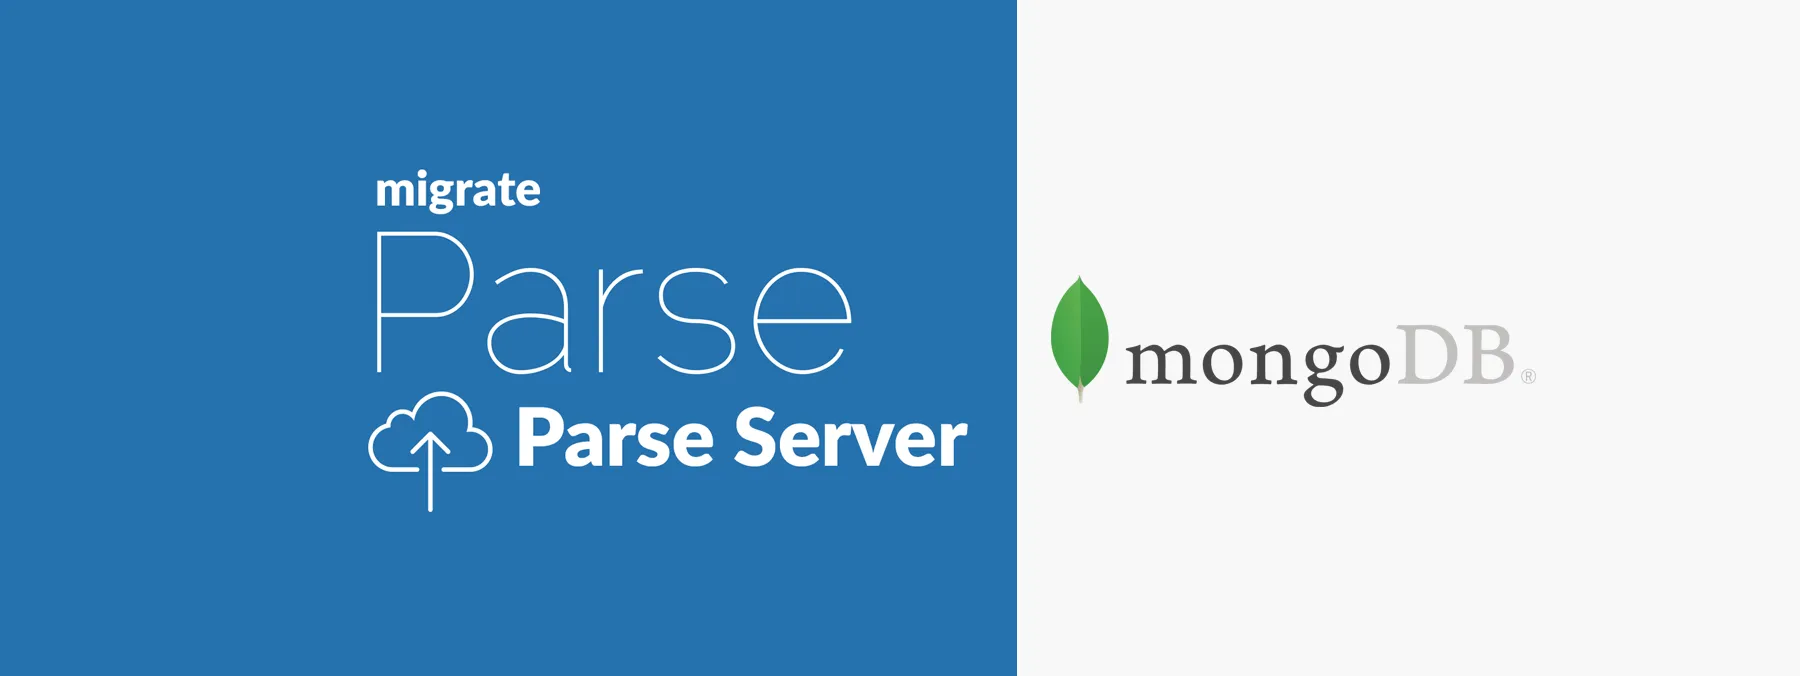 How to migrate Parse DB to self-hosted MongoDB?